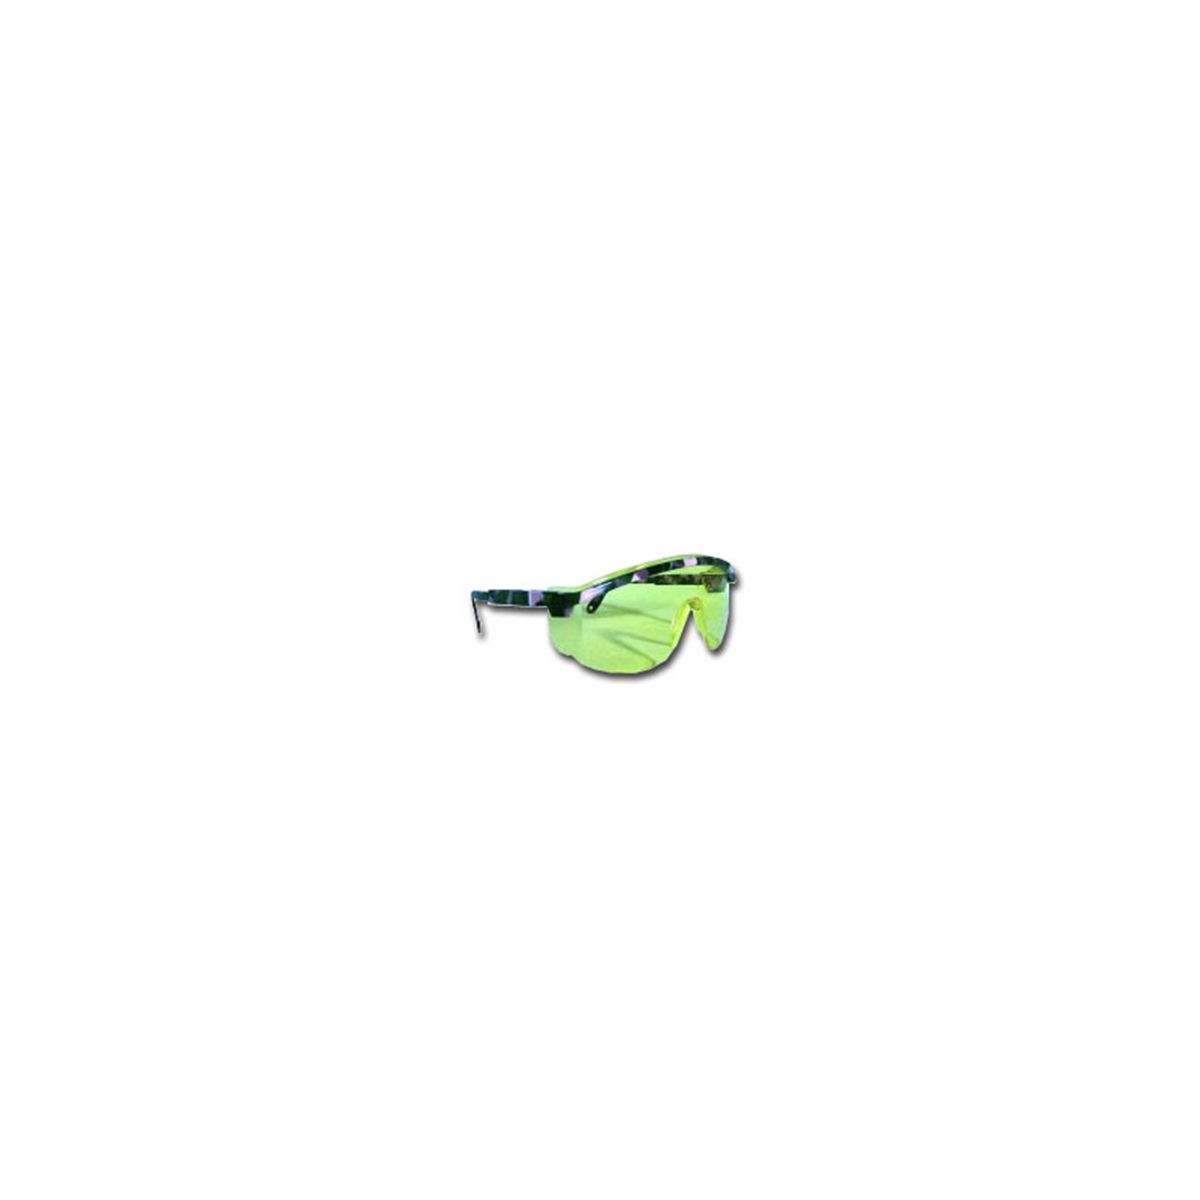 Spatula Safety Glasses - Astrospec 3000 - Camouflage/Mirror Lens